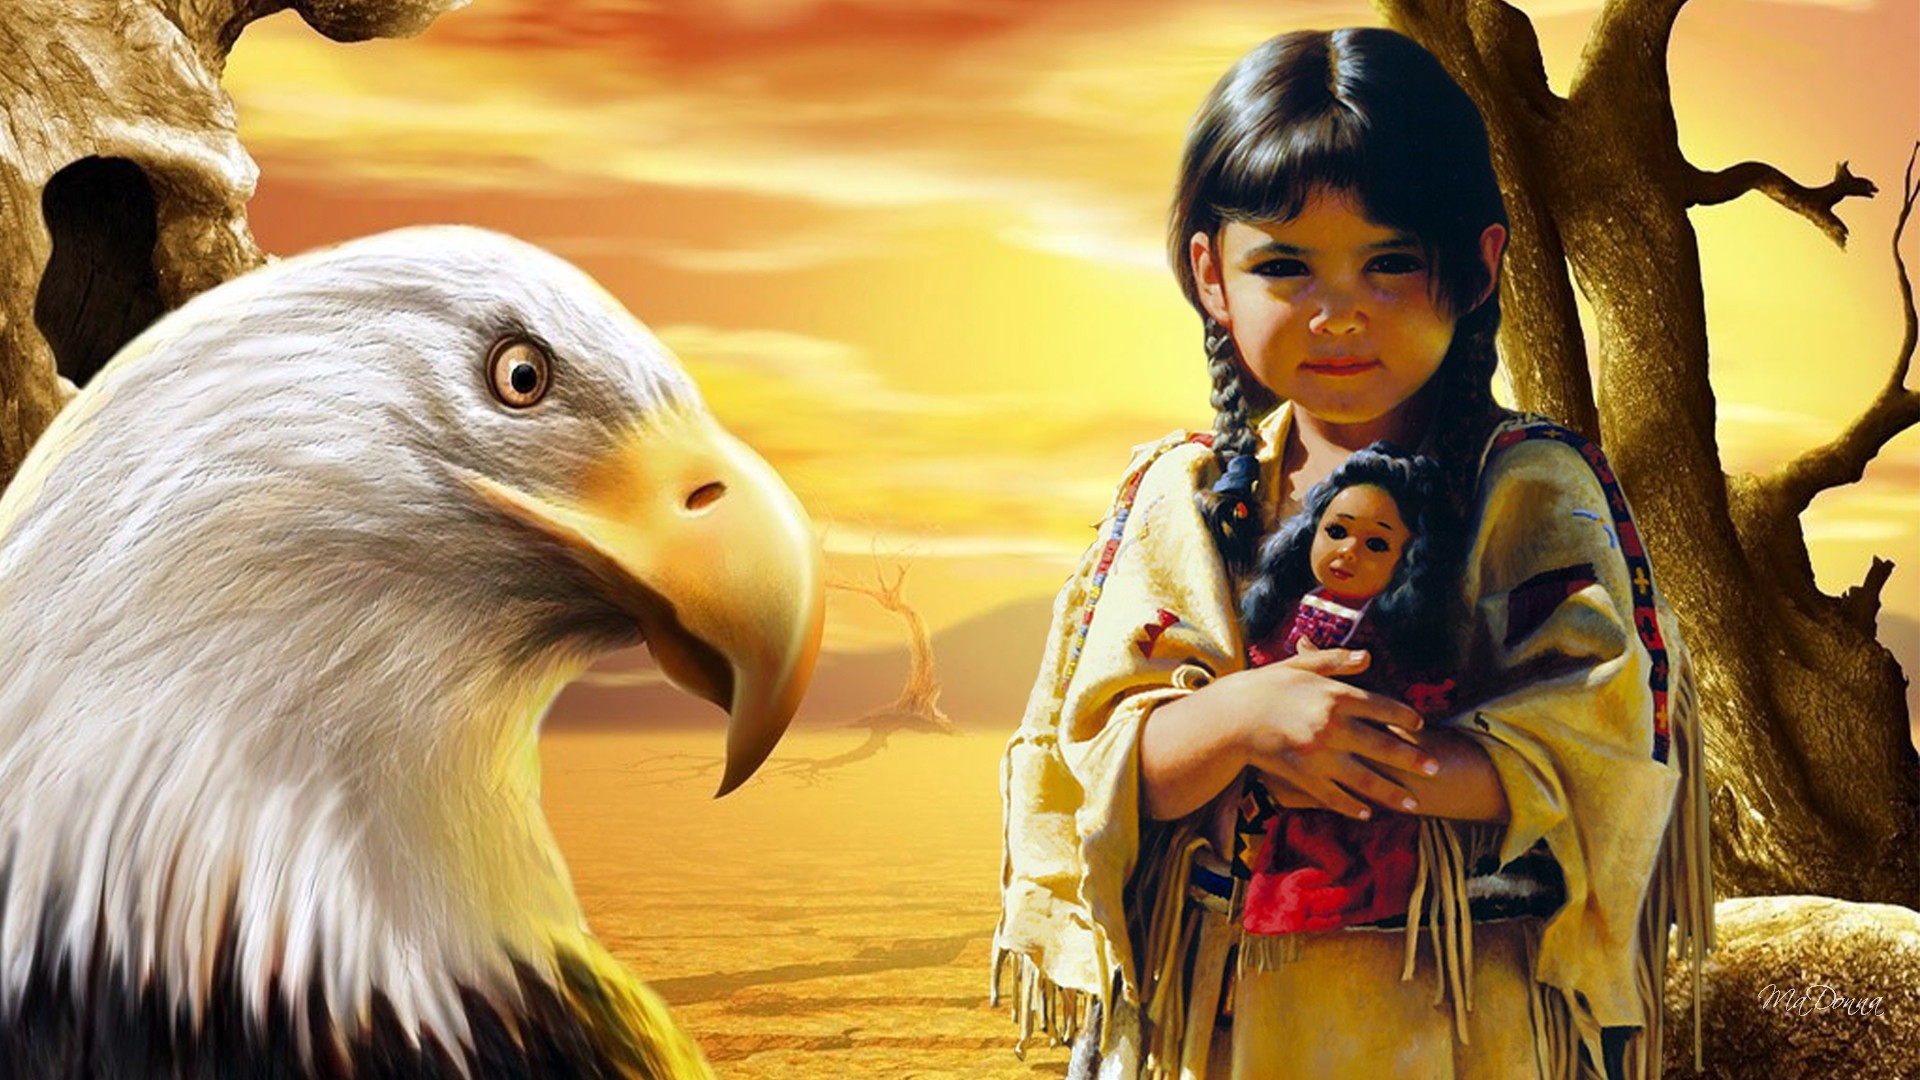 1920x1080 Native Americans images Native American HD wallpaper and background photos